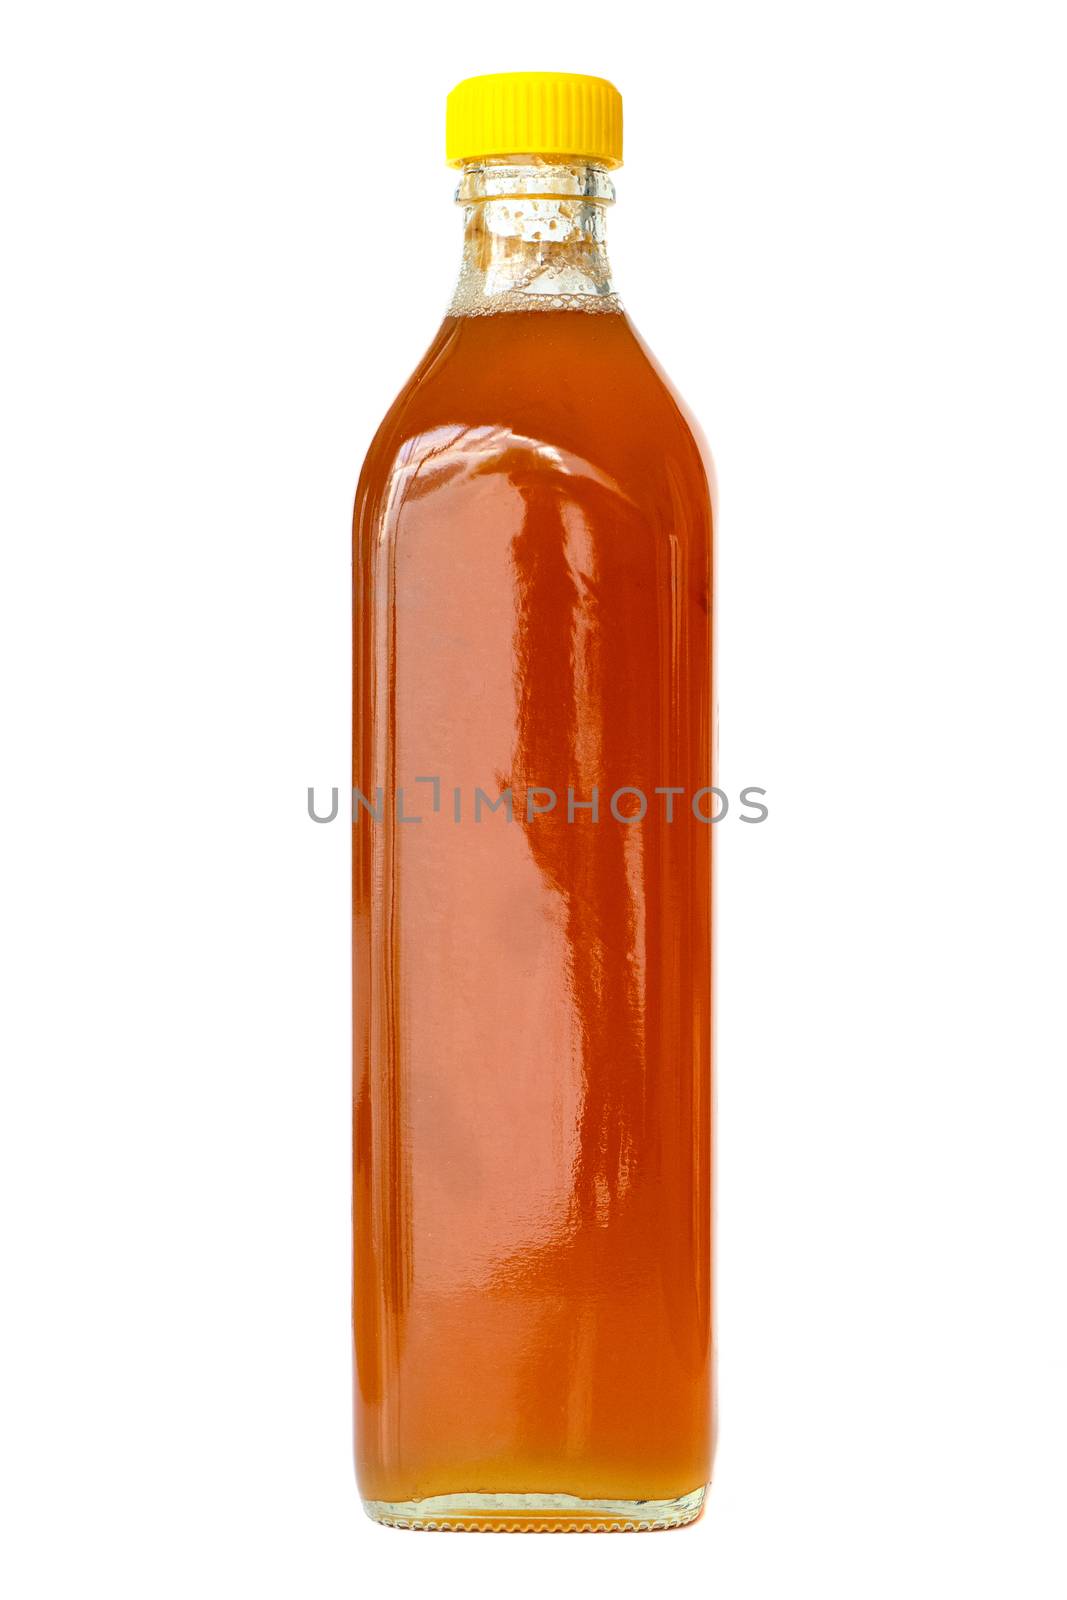 Raw unprocessed honey in glass bottle, isolated on white background.